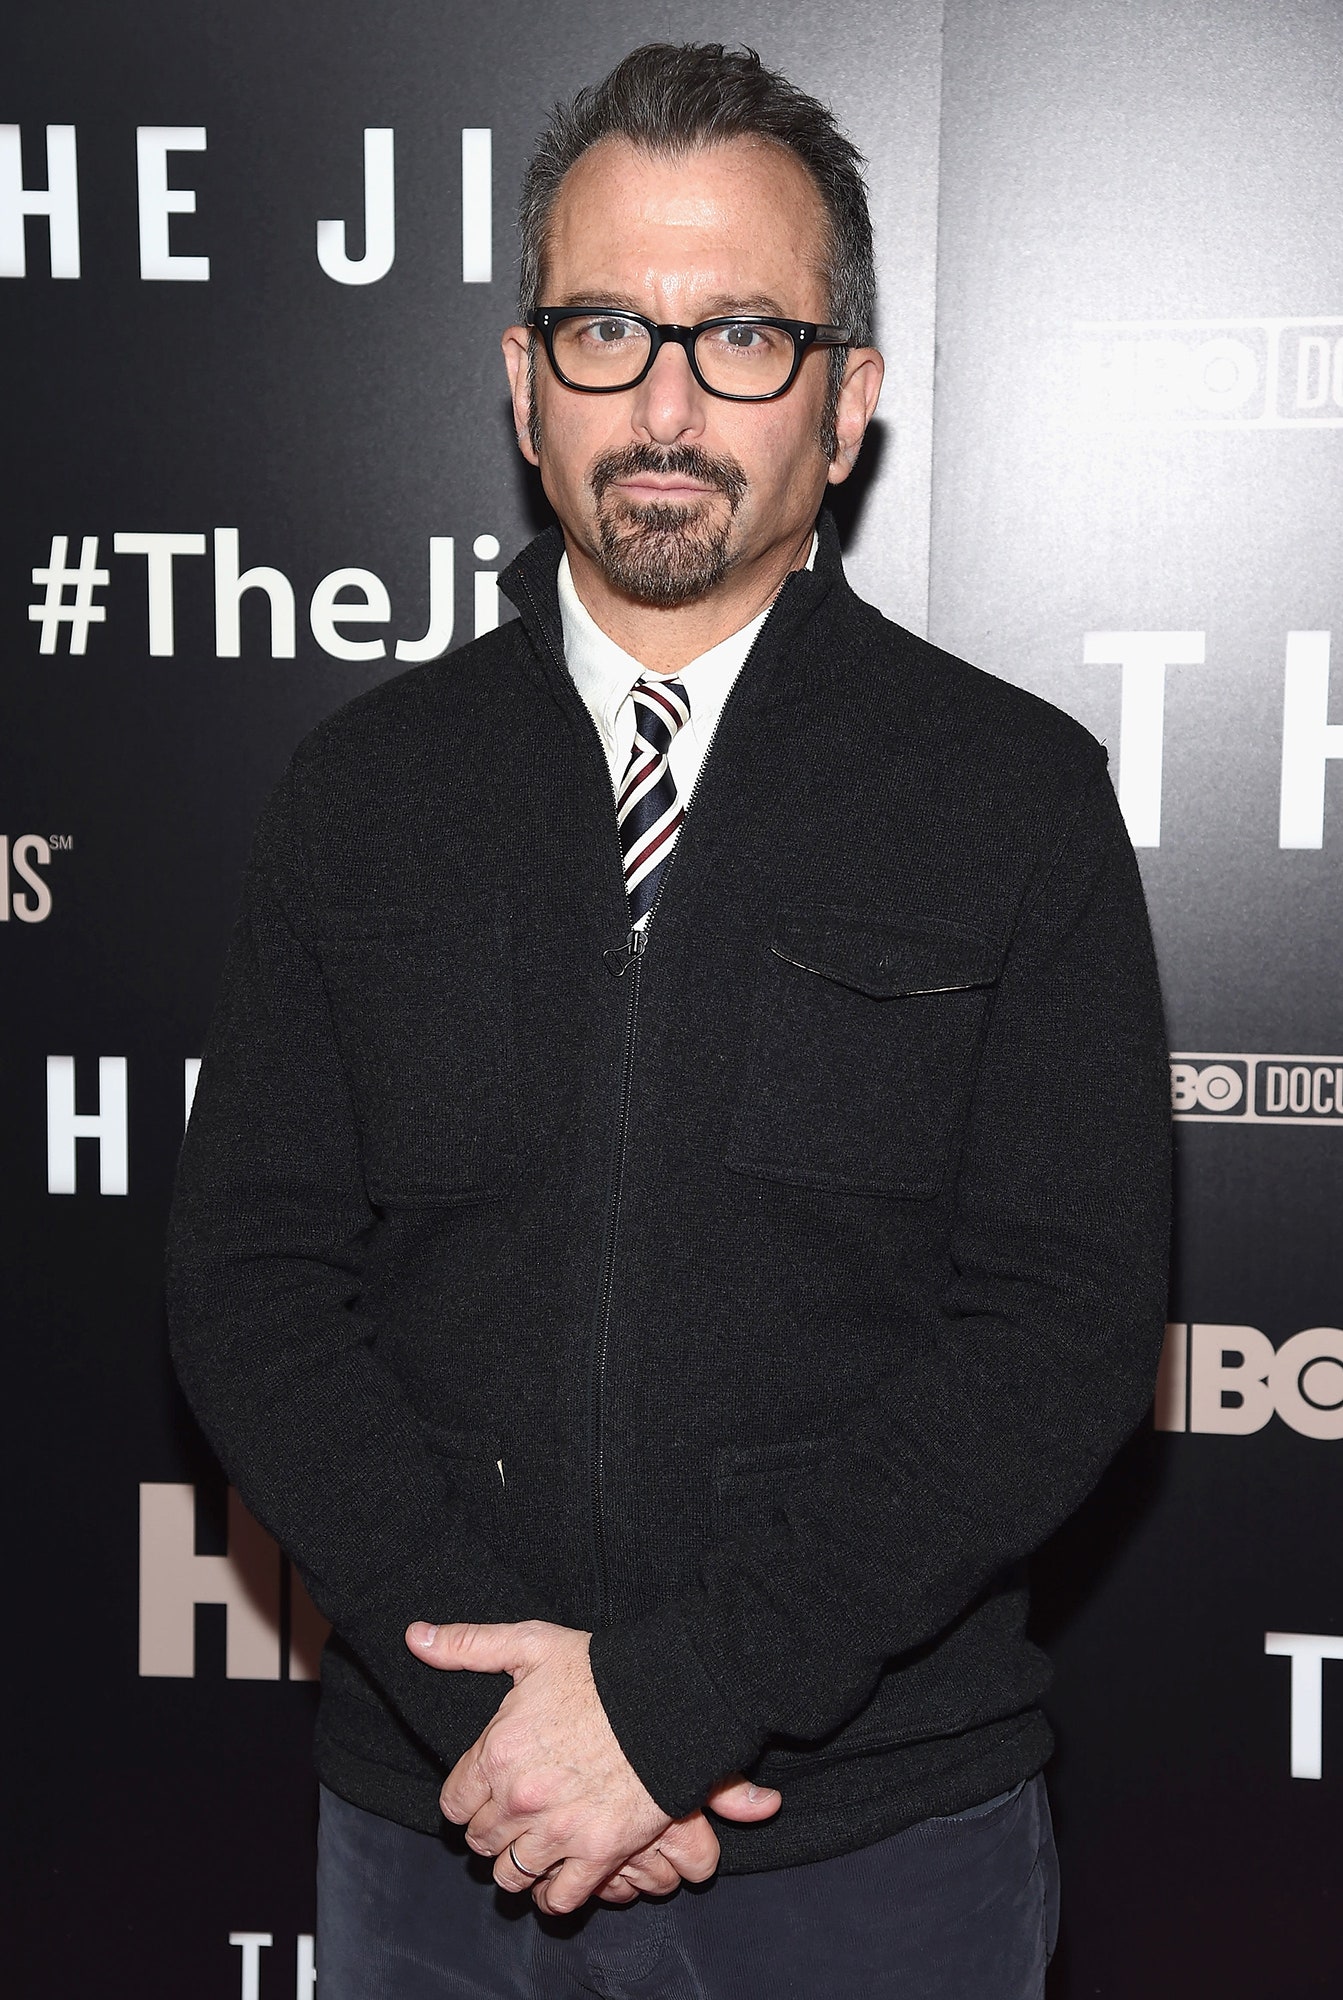 Image may contain Andrew Jarecki Fashion Adult Person Accessories Glasses Formal Wear Tie Clothing and Coat